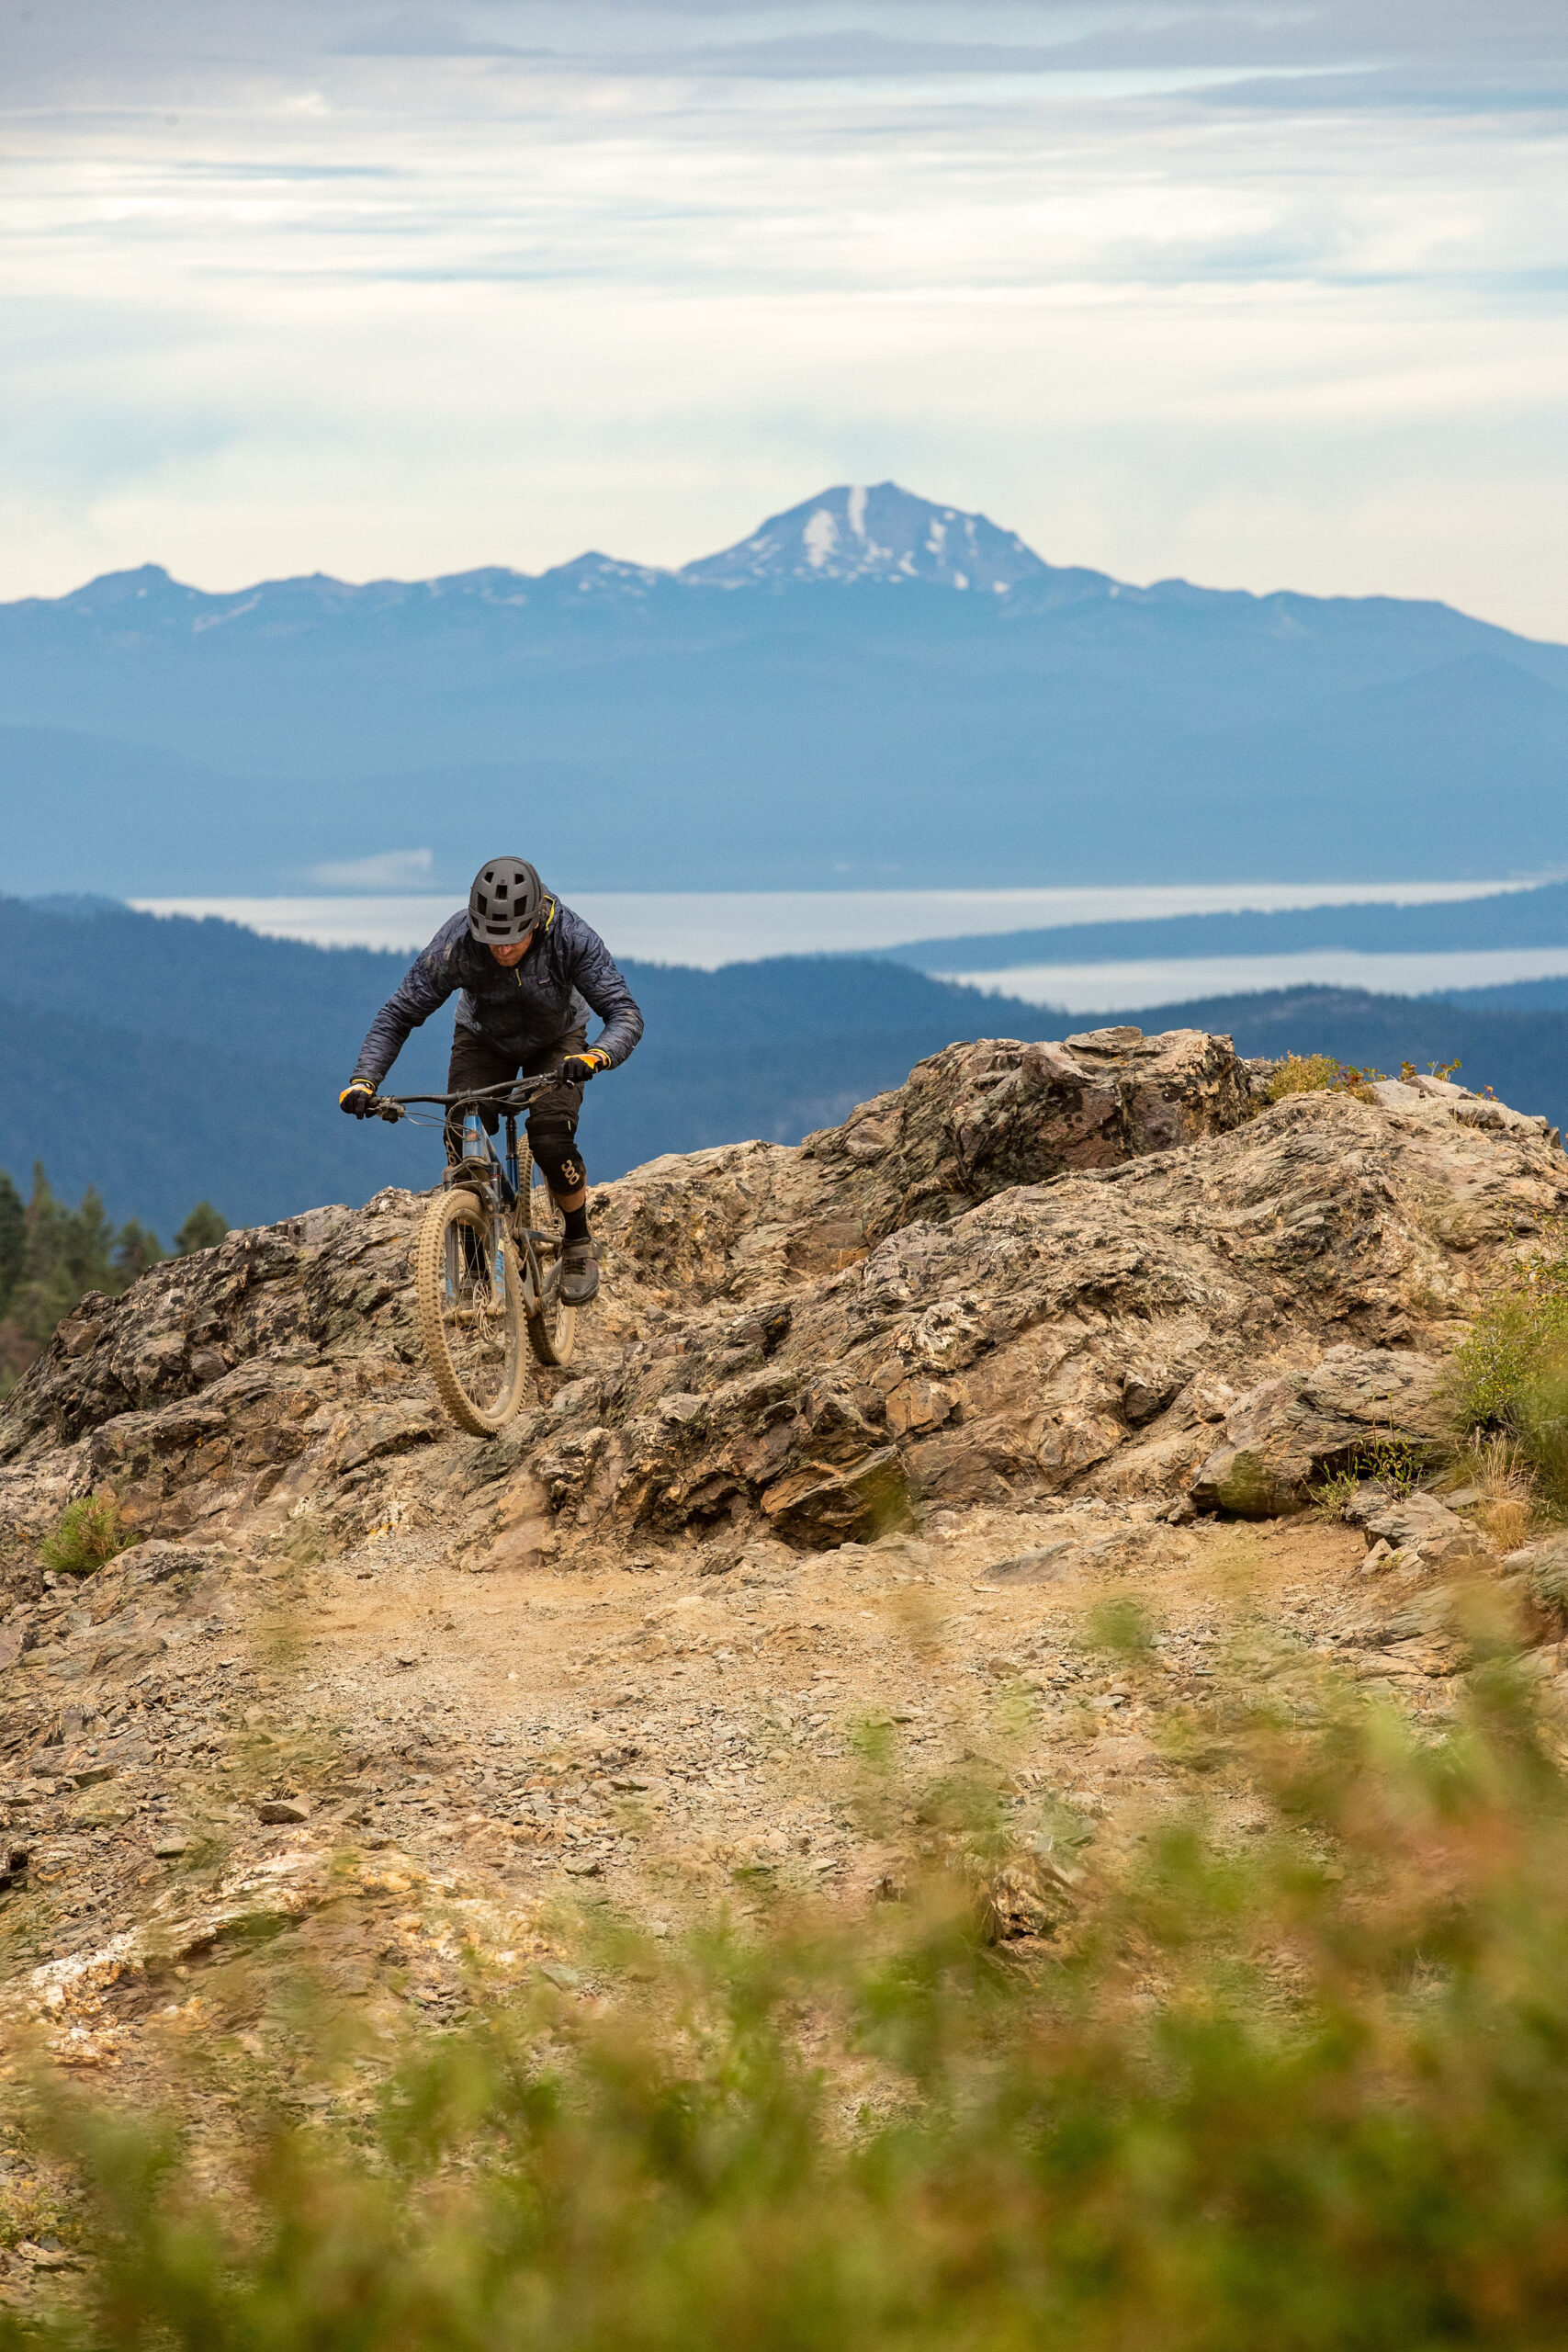 This photo shows a mountain biker going off a rocky jump with mountains in the background.